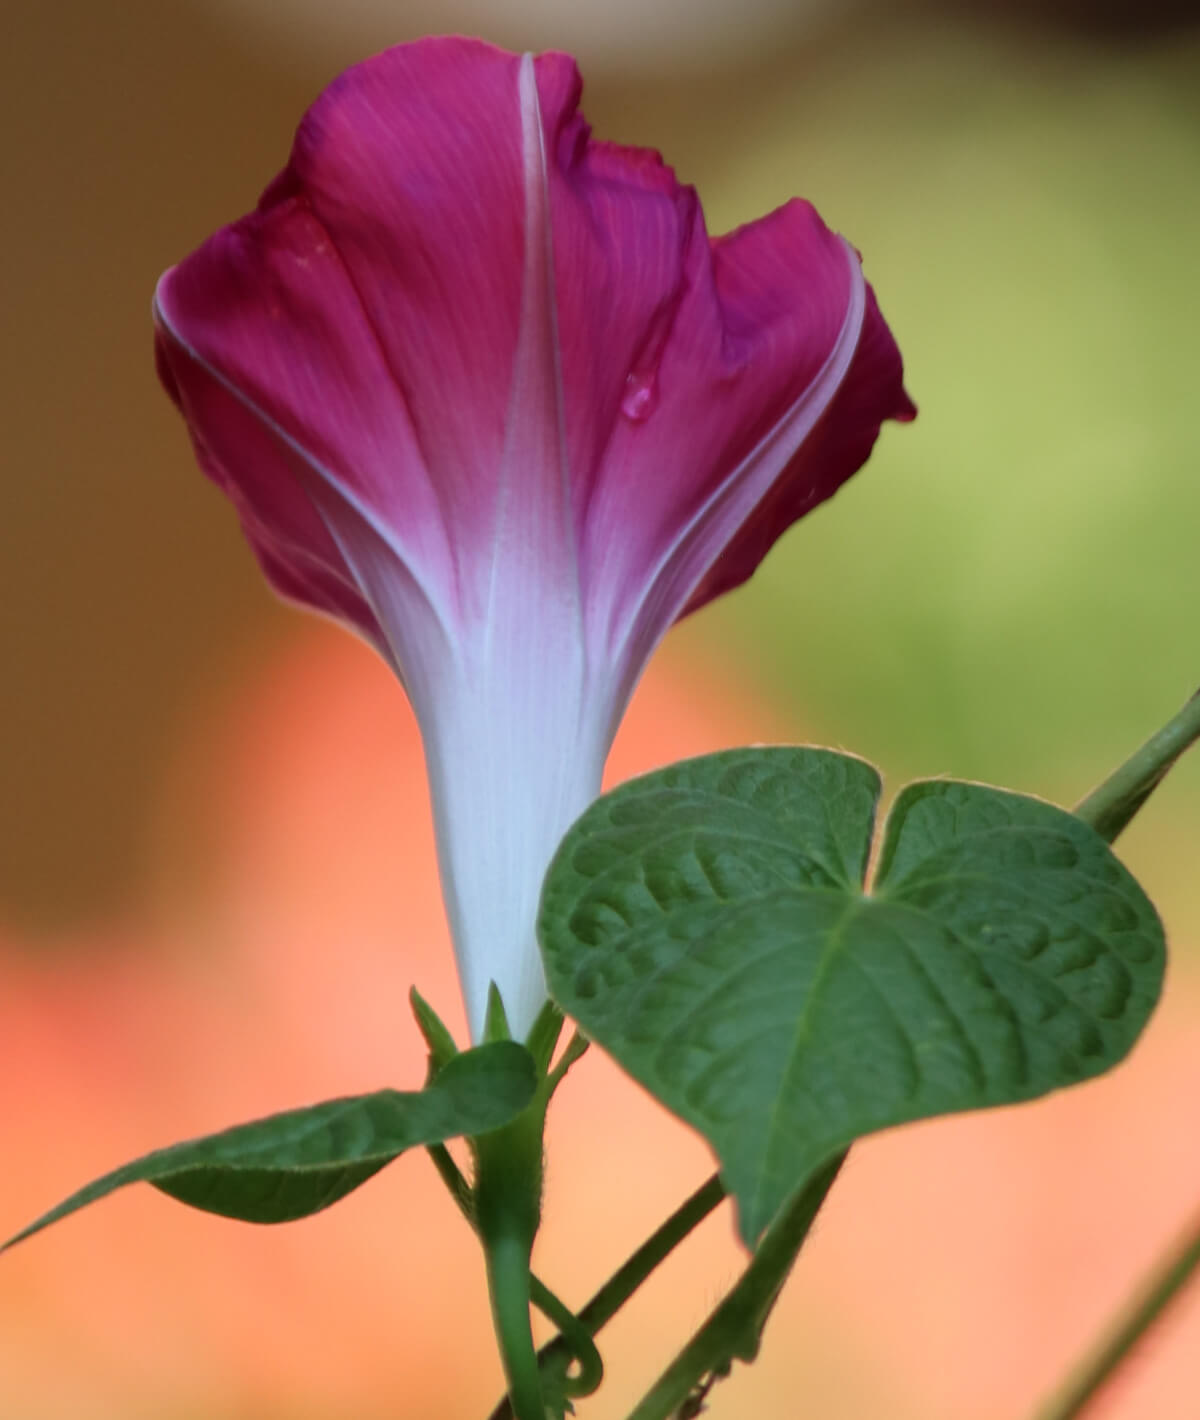 In Sunday Snippets 9.10.23, a pink morning glory in my garden